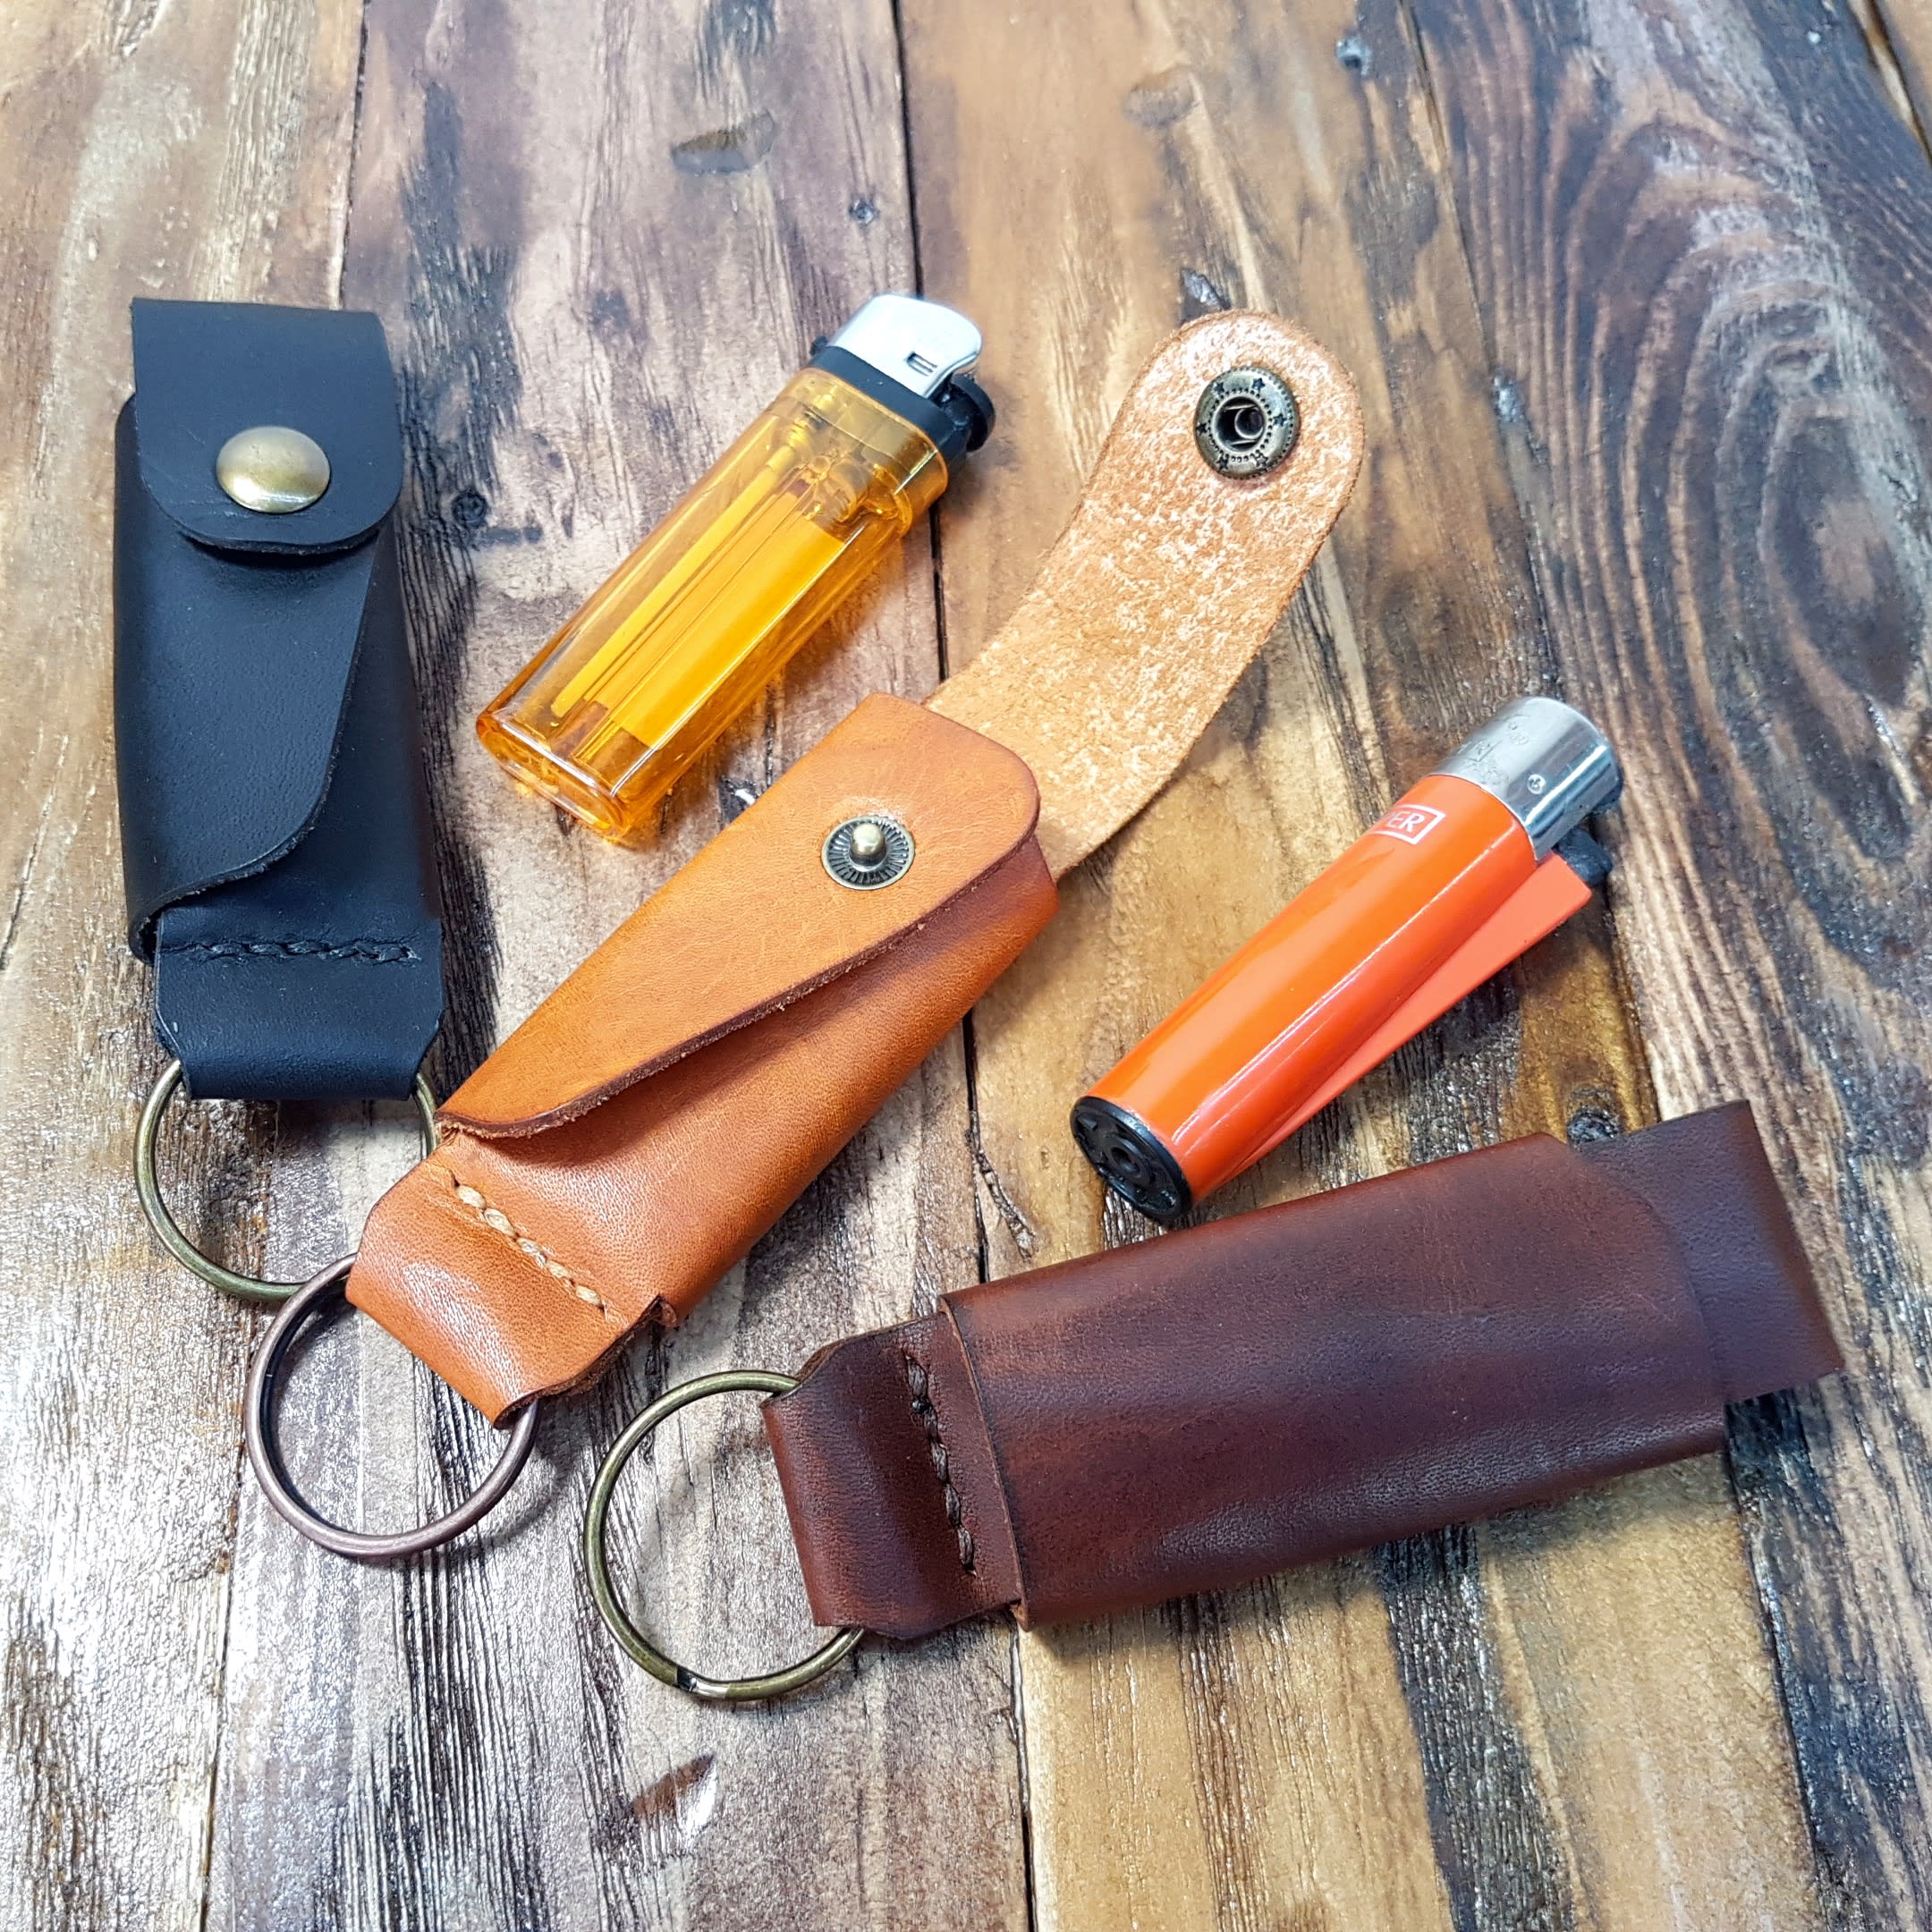 Leather Lighter Case 26 Different Styles Clipper Lighter 